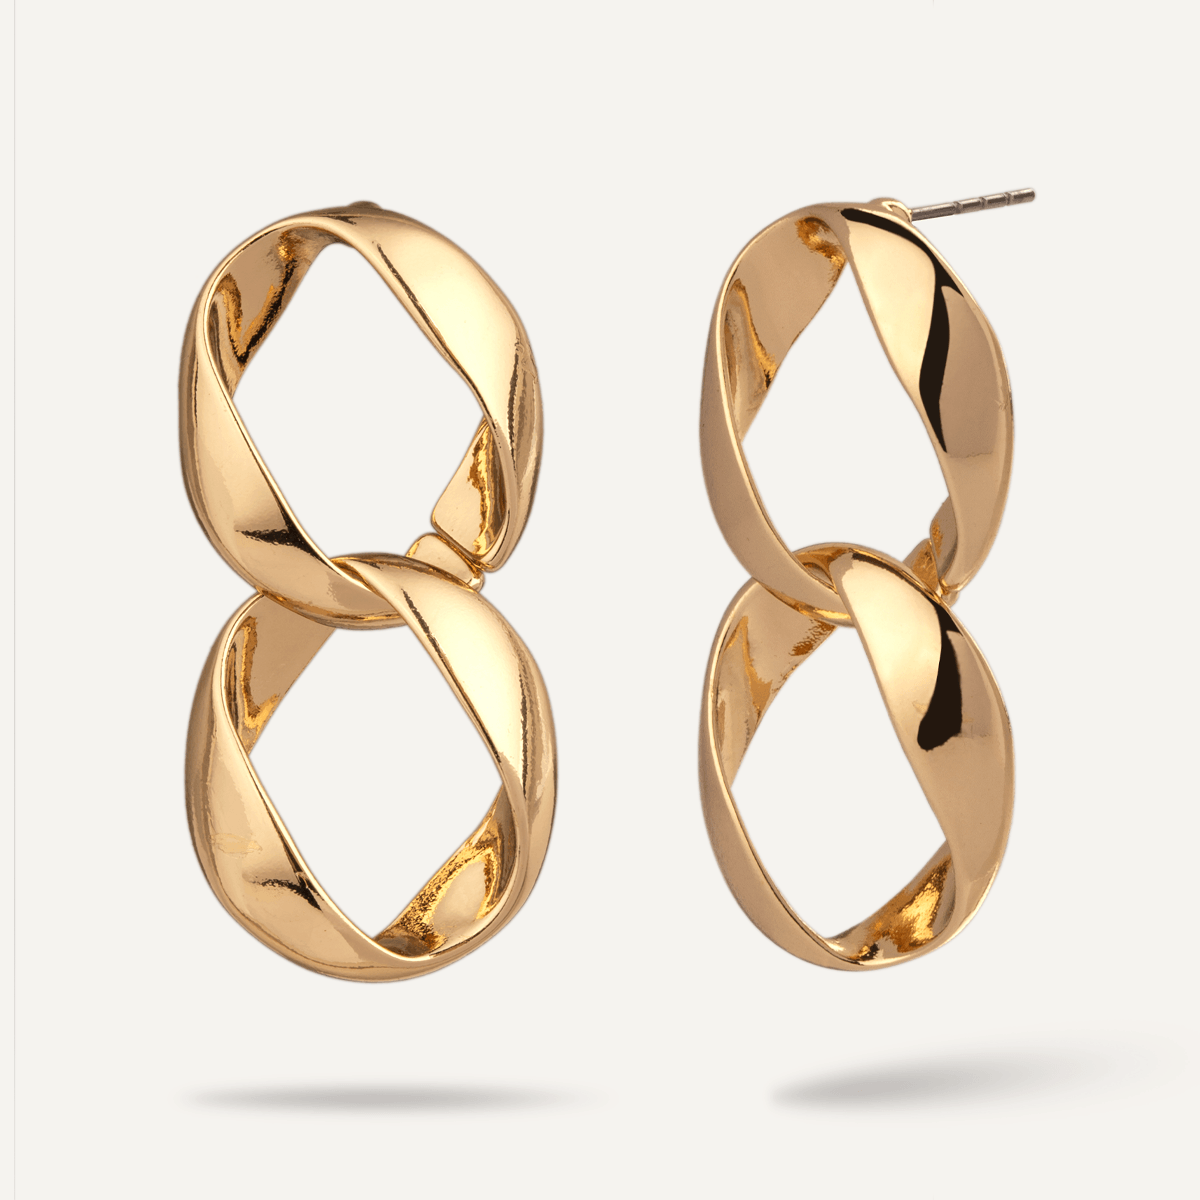 Zaha Abstract Twisted Circles Drop Earrings in Gold - D&X Retail